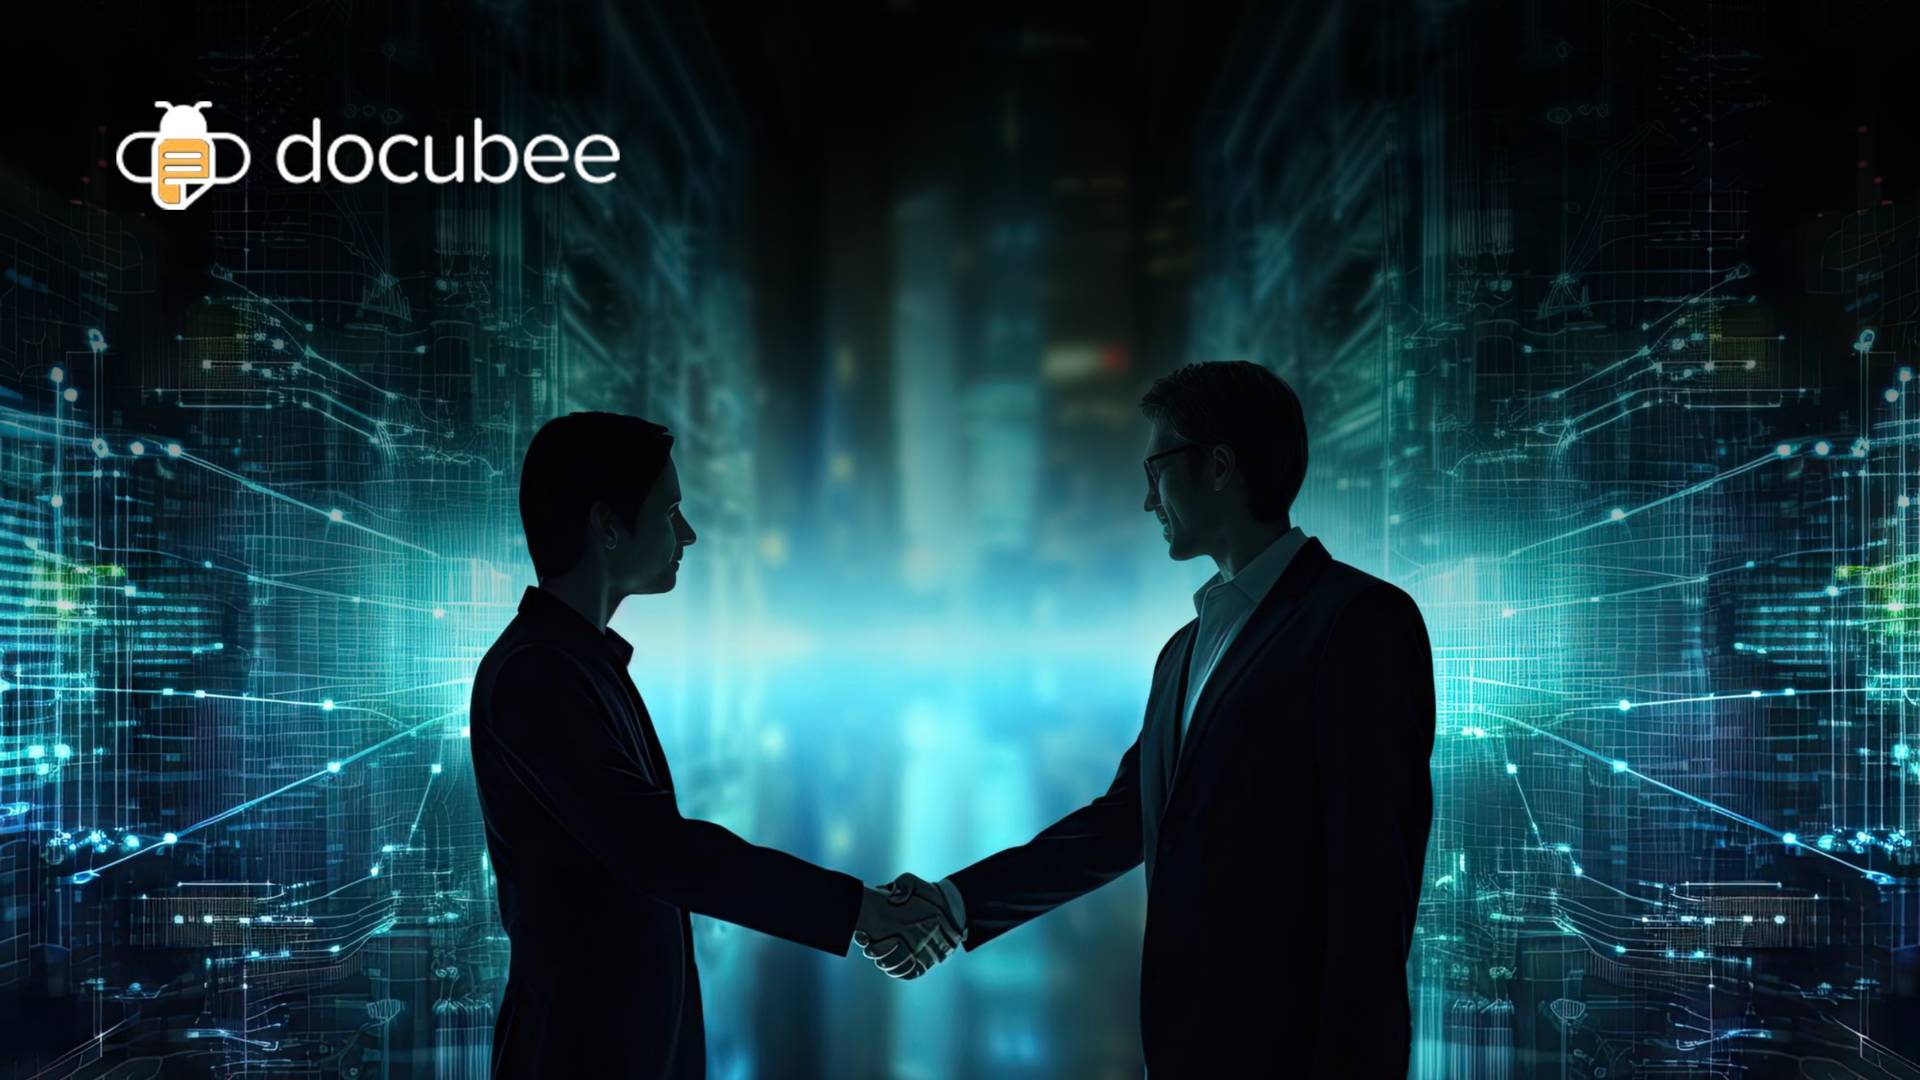 Docubee Launches Channel Partner Program to Expand Access to Versatile eSignature Solutions